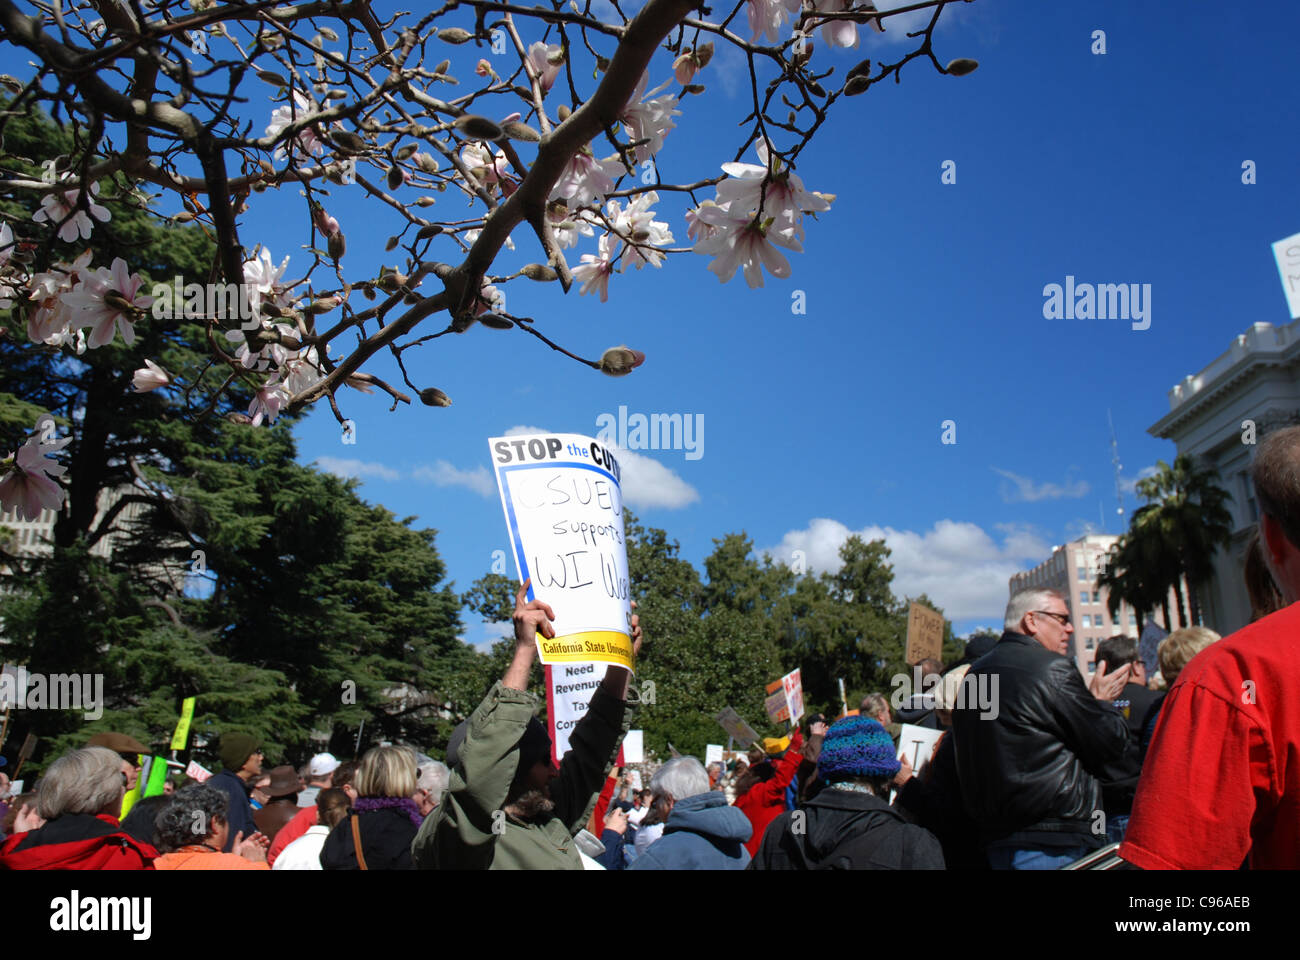 Labor union supporters gather at the California State Capitol at the 'Rally to Save the American Dream' Stock Photo